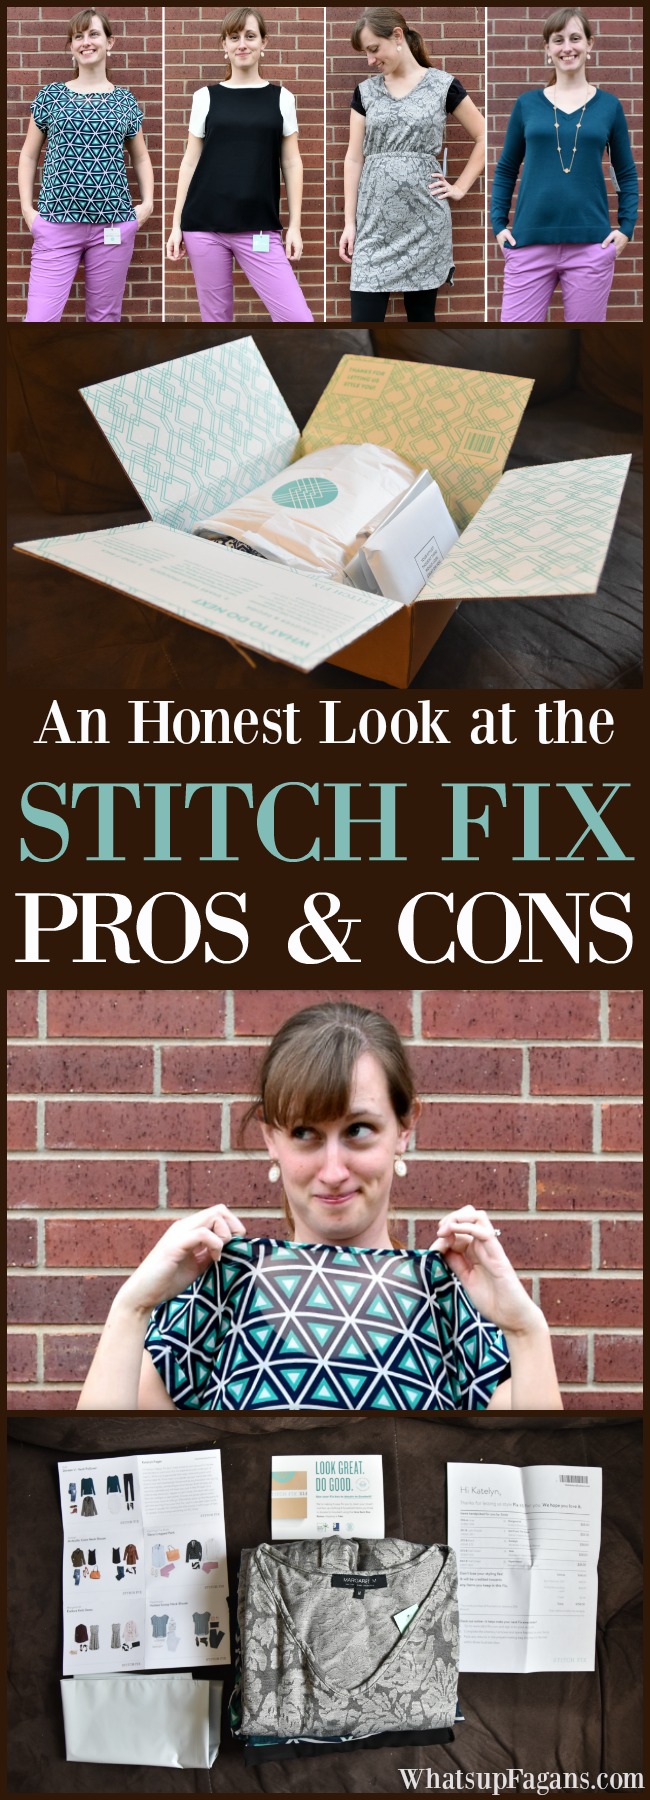 Stitch Fix Pros and Cons | Stitch Fix Cost |Negative Review Positive Review | Bad Review | Honest Review | Clothing Subscription box | Fashion | Style | Personal Stylist | Trends | Wardrobe | Examples | Unboxing 